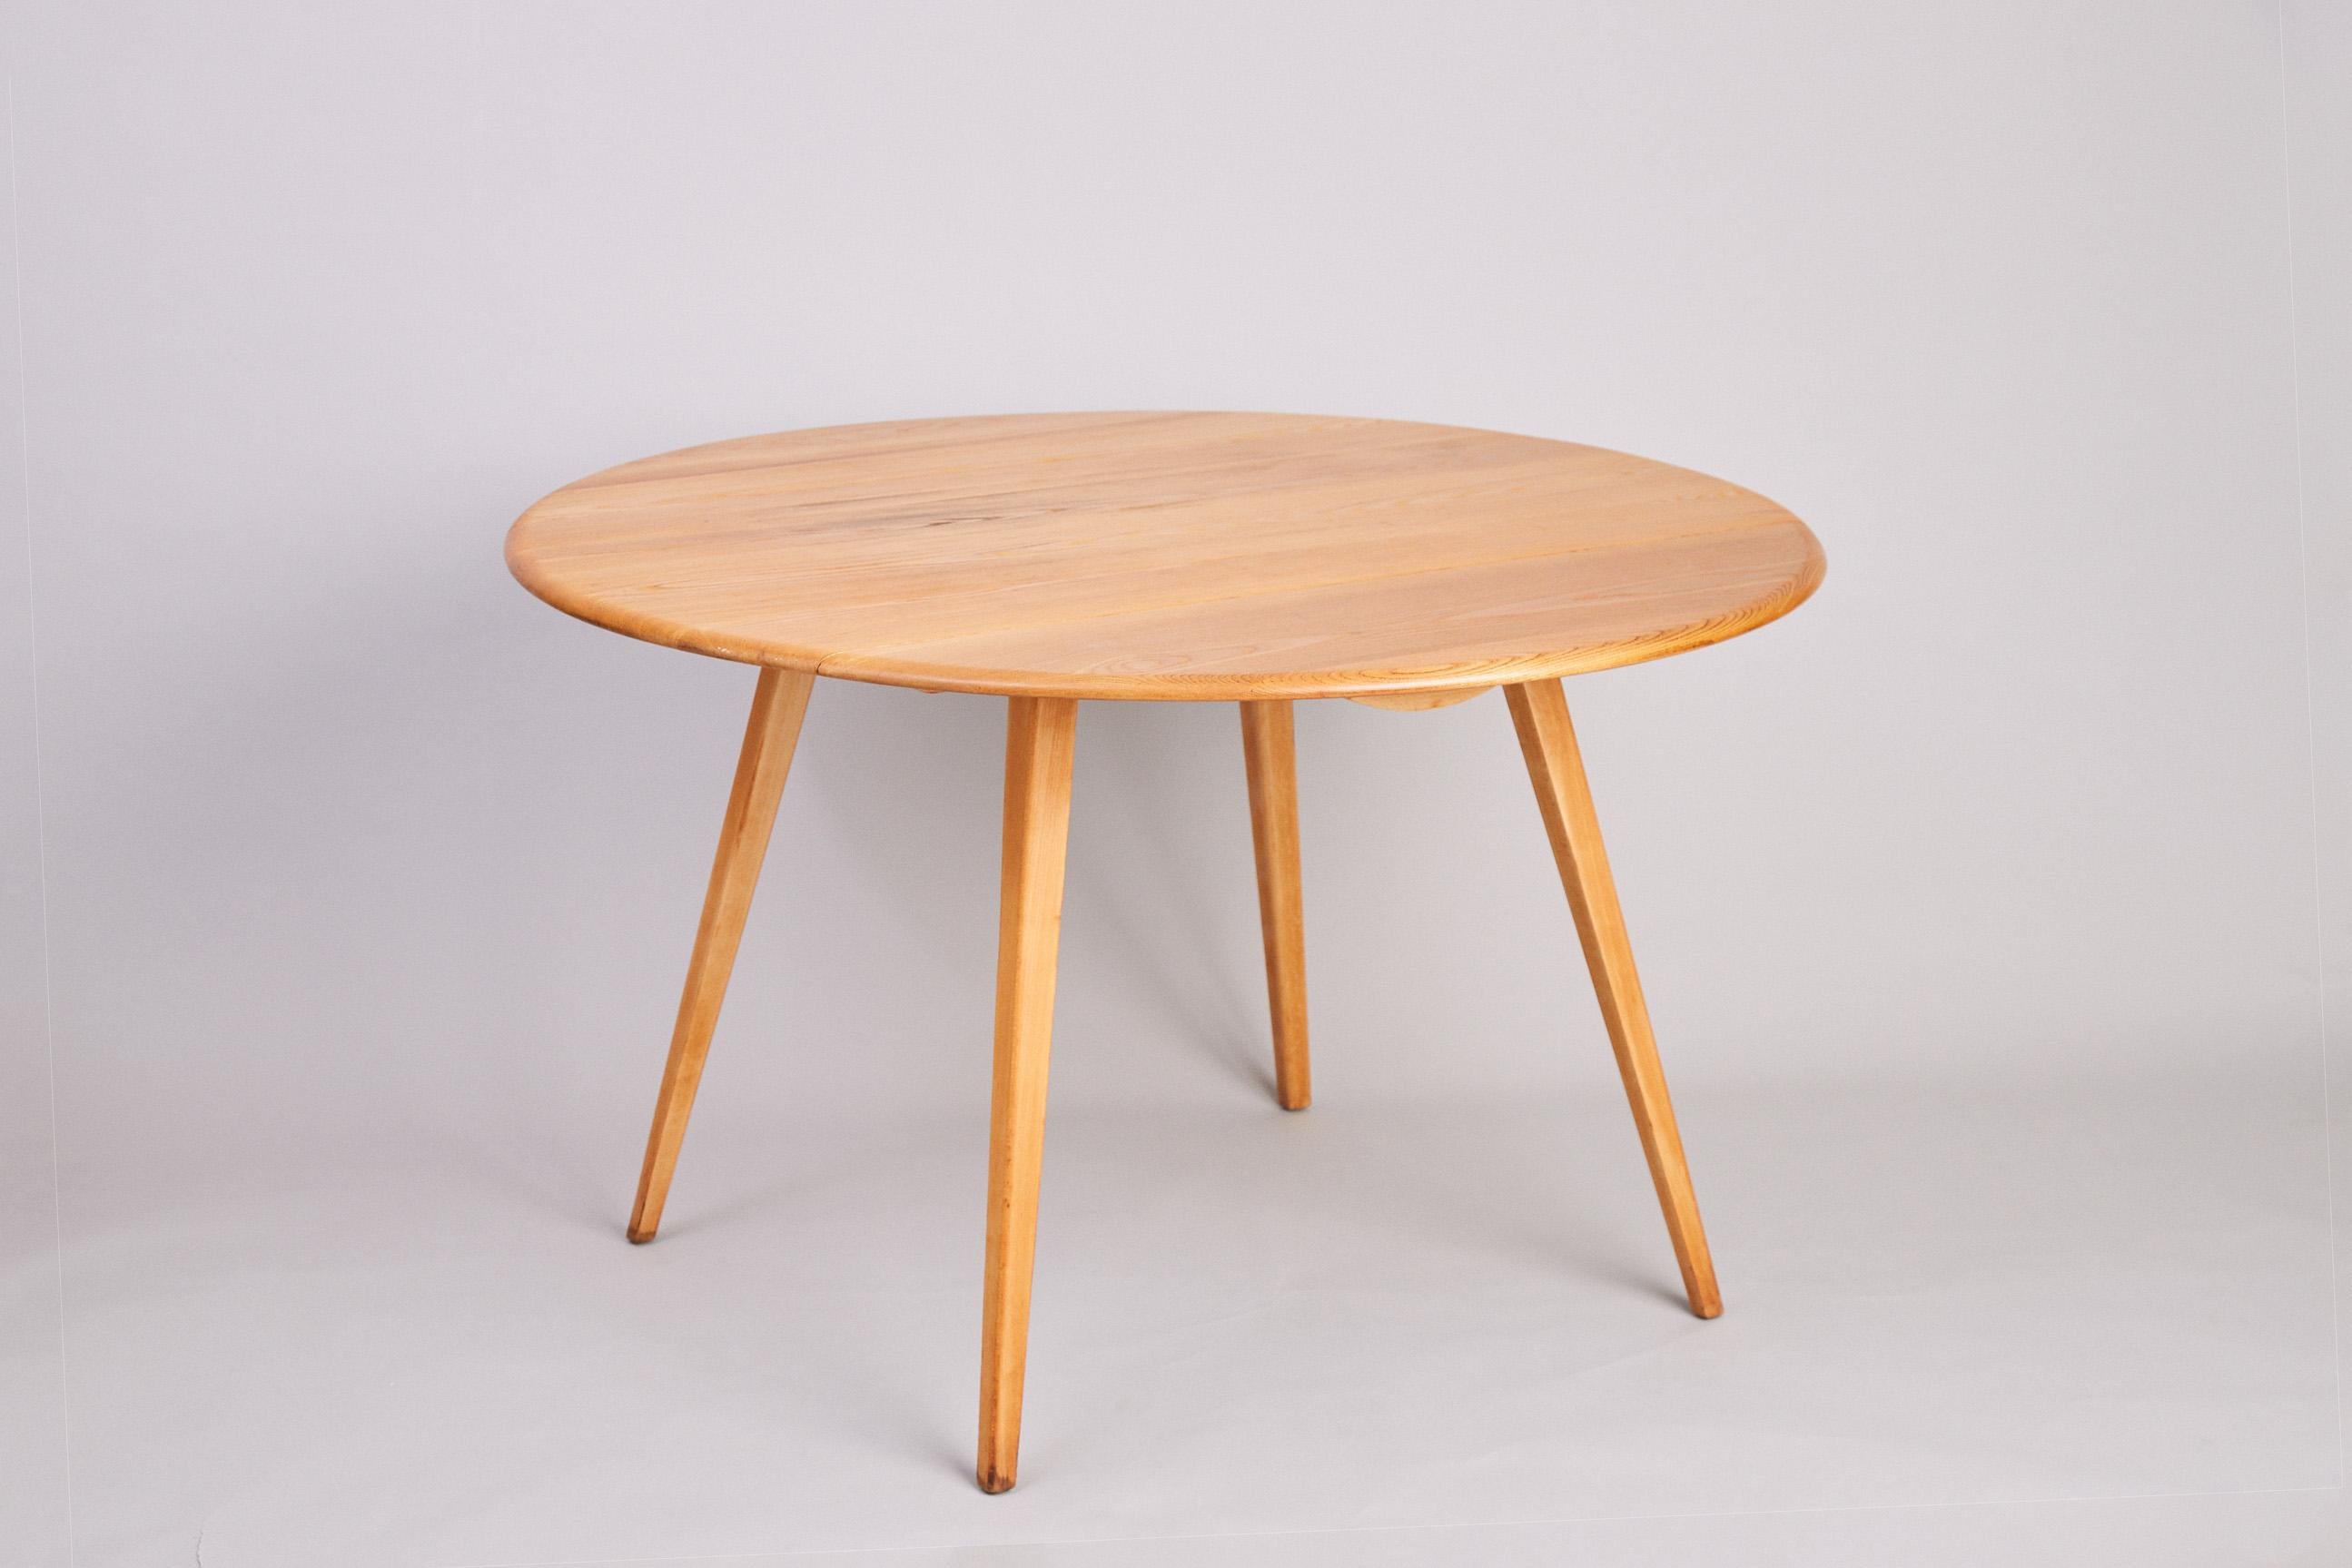 Vintage Ercol round drop leaf dining table (earlier blue label model). Referred to in Ercol's 1956 catalogue as model 384 and designed to sit 6 people when fully opened.
Solid elm top on beech legs. In the desirable blonde Elm, this item has been